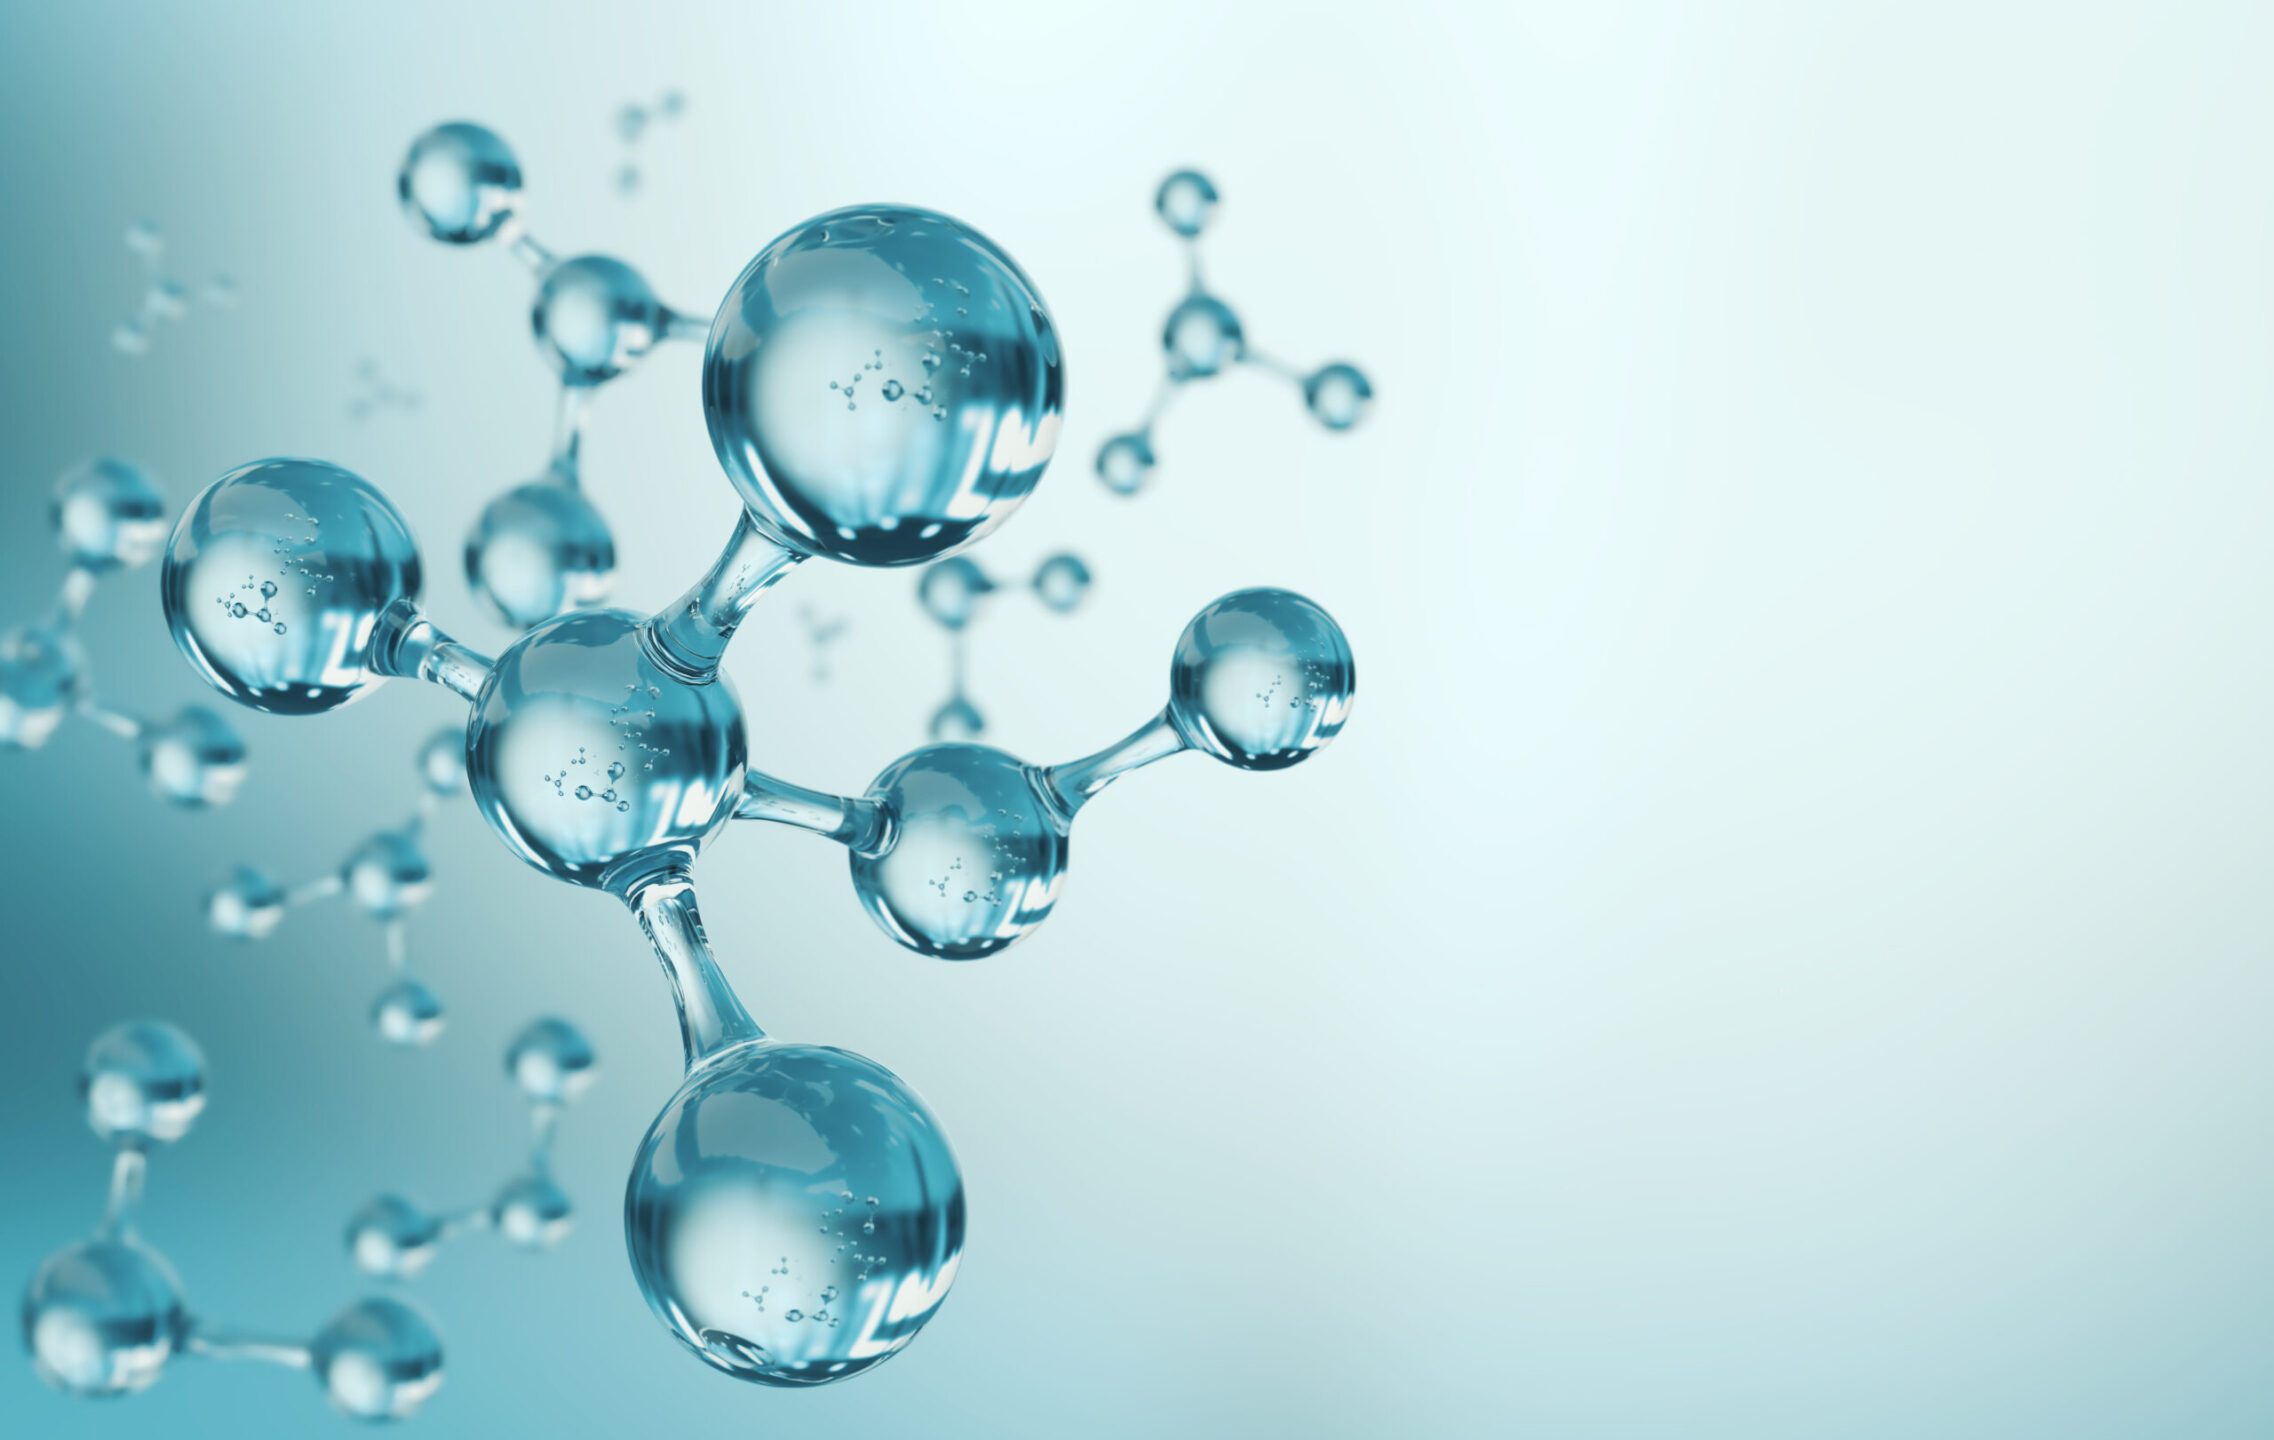 3D illustration with light blue background and a molecule or atom, abstract structure for science.